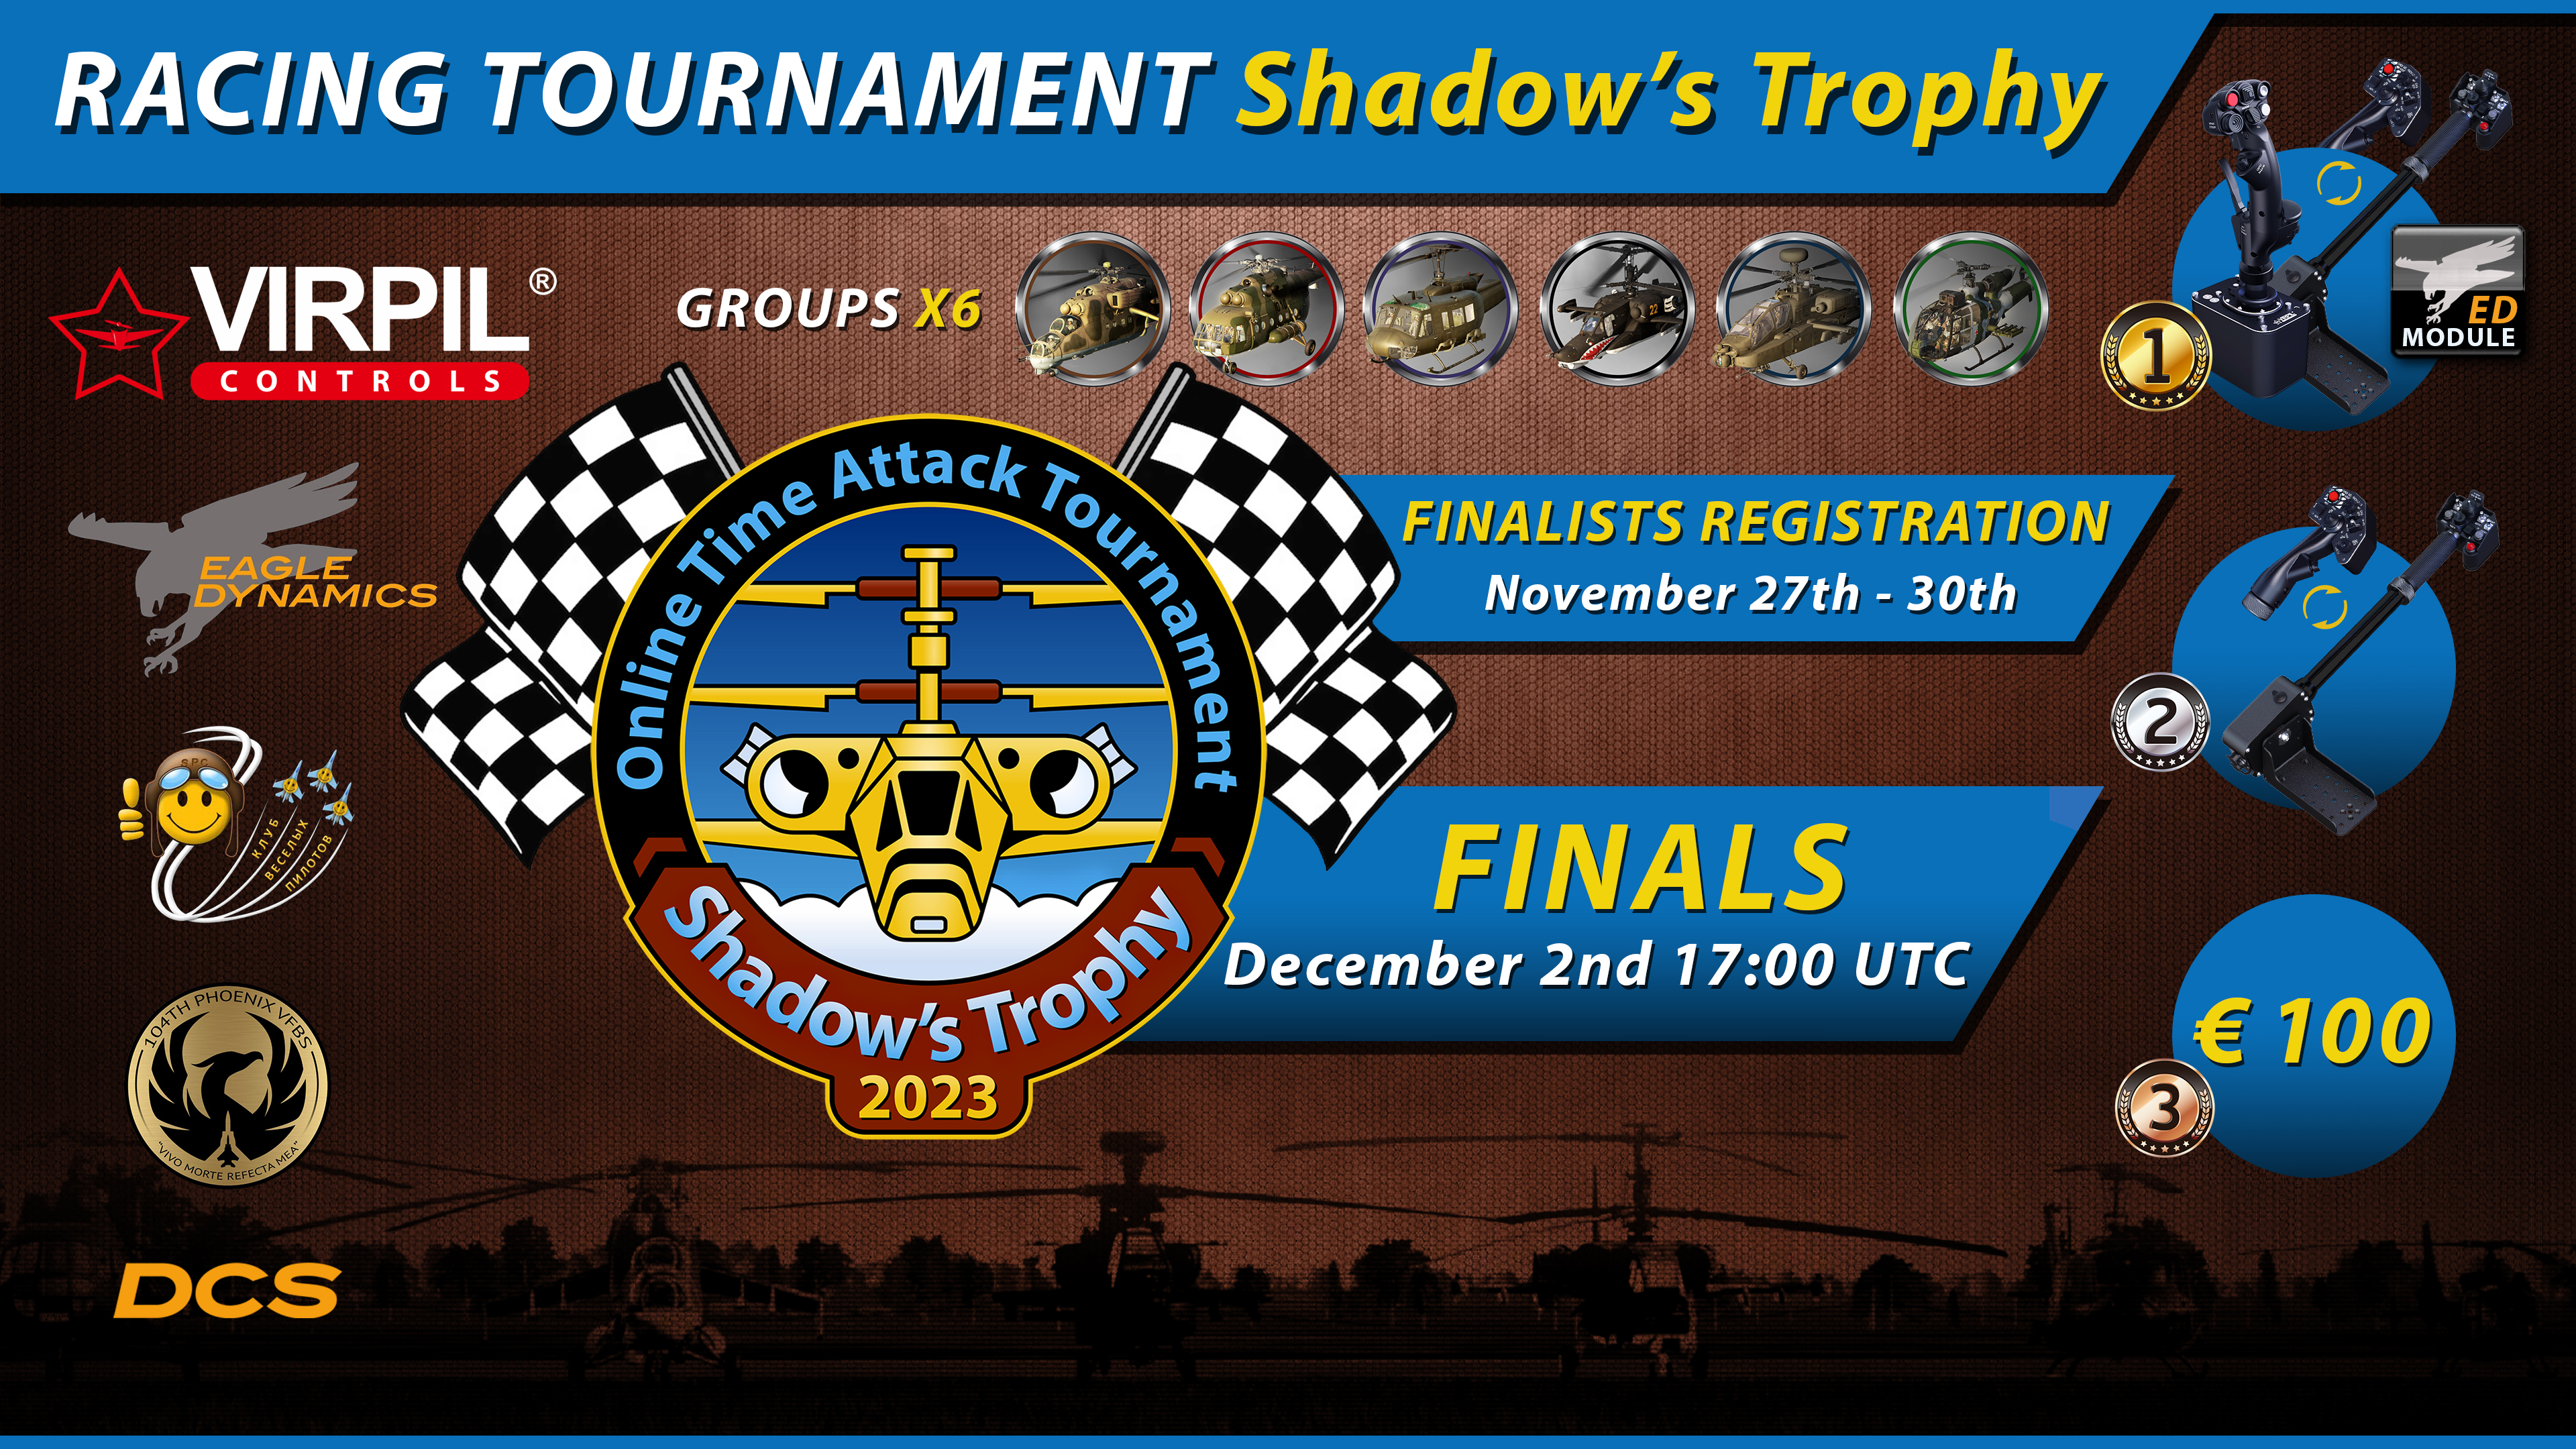 Shadow's Trophy 2023 Qualification has ended! Finalists are invited